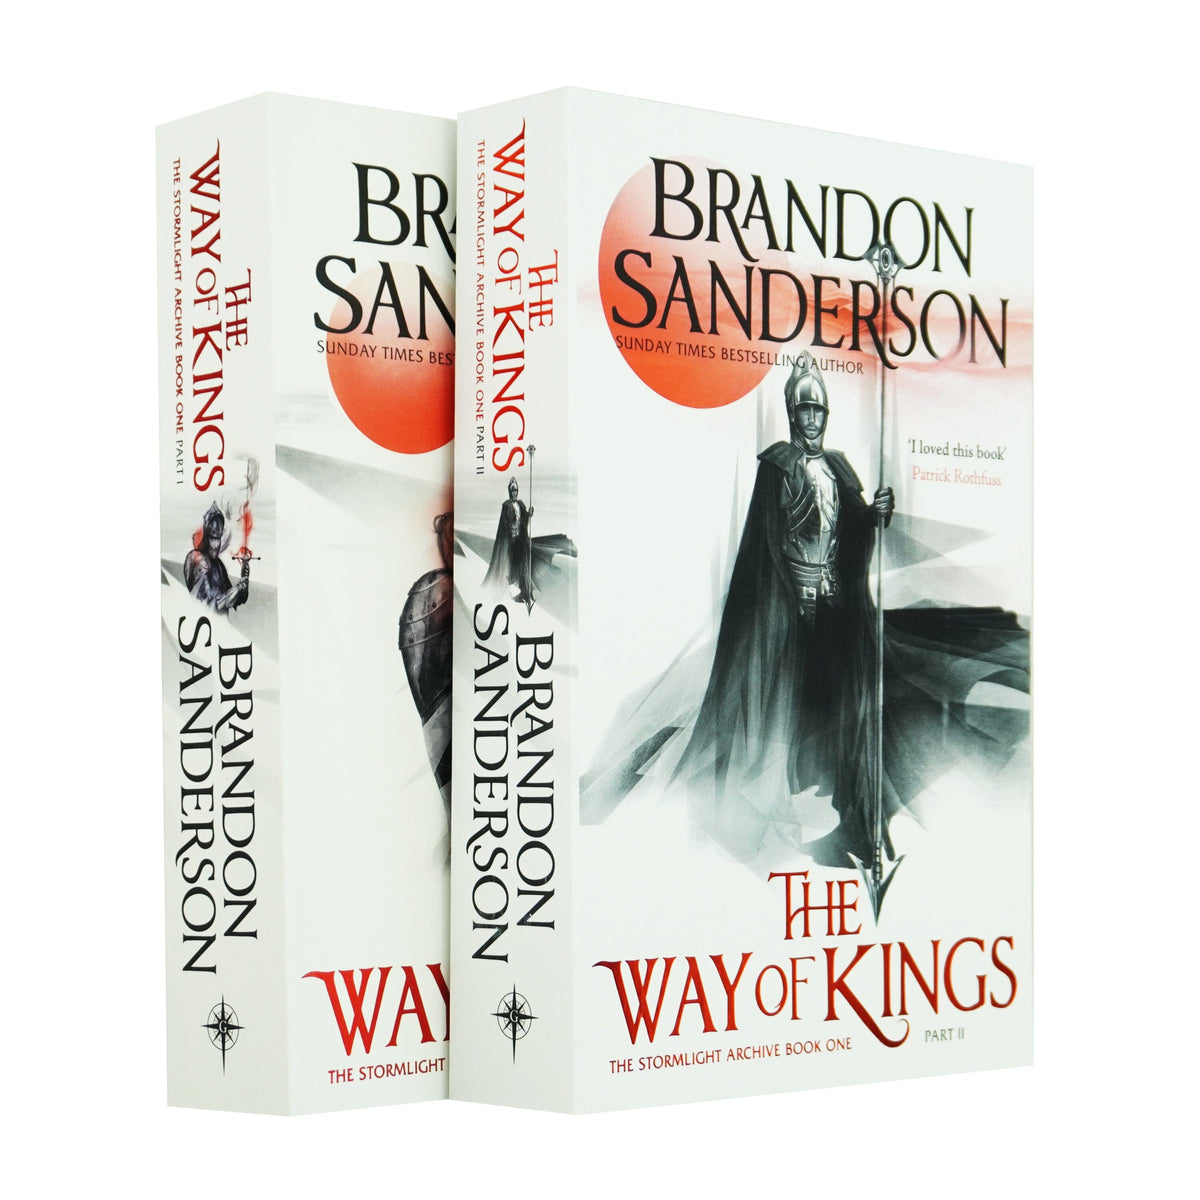 The Way of Kings (The Stormlight Archive, #1) by Brandon Sanderson